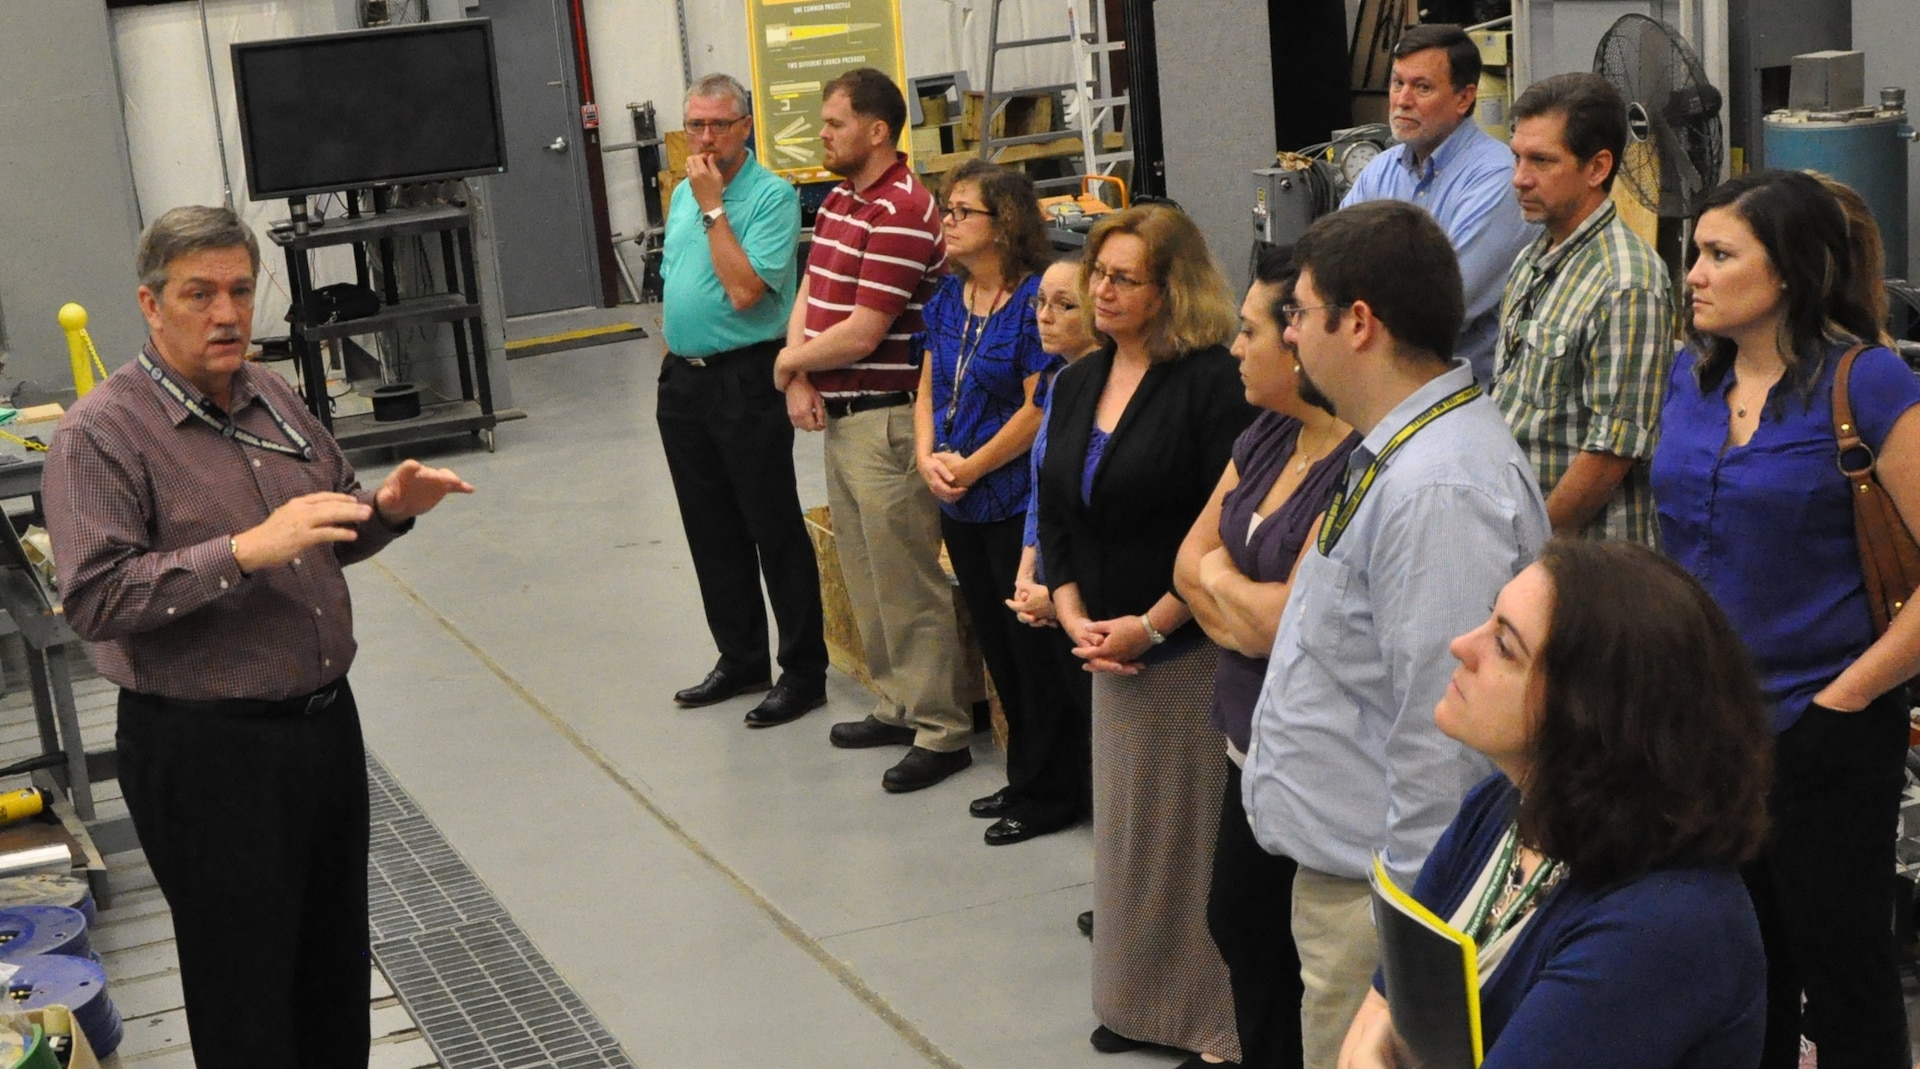 IMAGE: DAHLGREN, Va. (June 21, 2018) - Propel students review the Electromagnetic Railgun design parameters and test operations during a tour of the NSWC Dahlgren Division Electromagnetic Launch Facility conducted by Chester Petry, Chief Engineer for Electromagnetic Launch Weapons.  The Propel students discussed the use of electric weapons on future Navy combatants where the need for electric power will continue to grow and improve combat capability. Petry briefed the Warfare Centers' new supervisors during their tour of Dahlgren that included the Potomac River Test Range and the Human Performance Laboratory in addition to the Railgun Facility. The five-day Propel course provides an introductory level awareness of Warfare Center expectations and teaches a whole person supervisory approach that focuses on understanding supervisory responsibilities, practicing soft skills, and knowing where to go for situationally specific human resources support.  (U.S. Navy photo/Released)